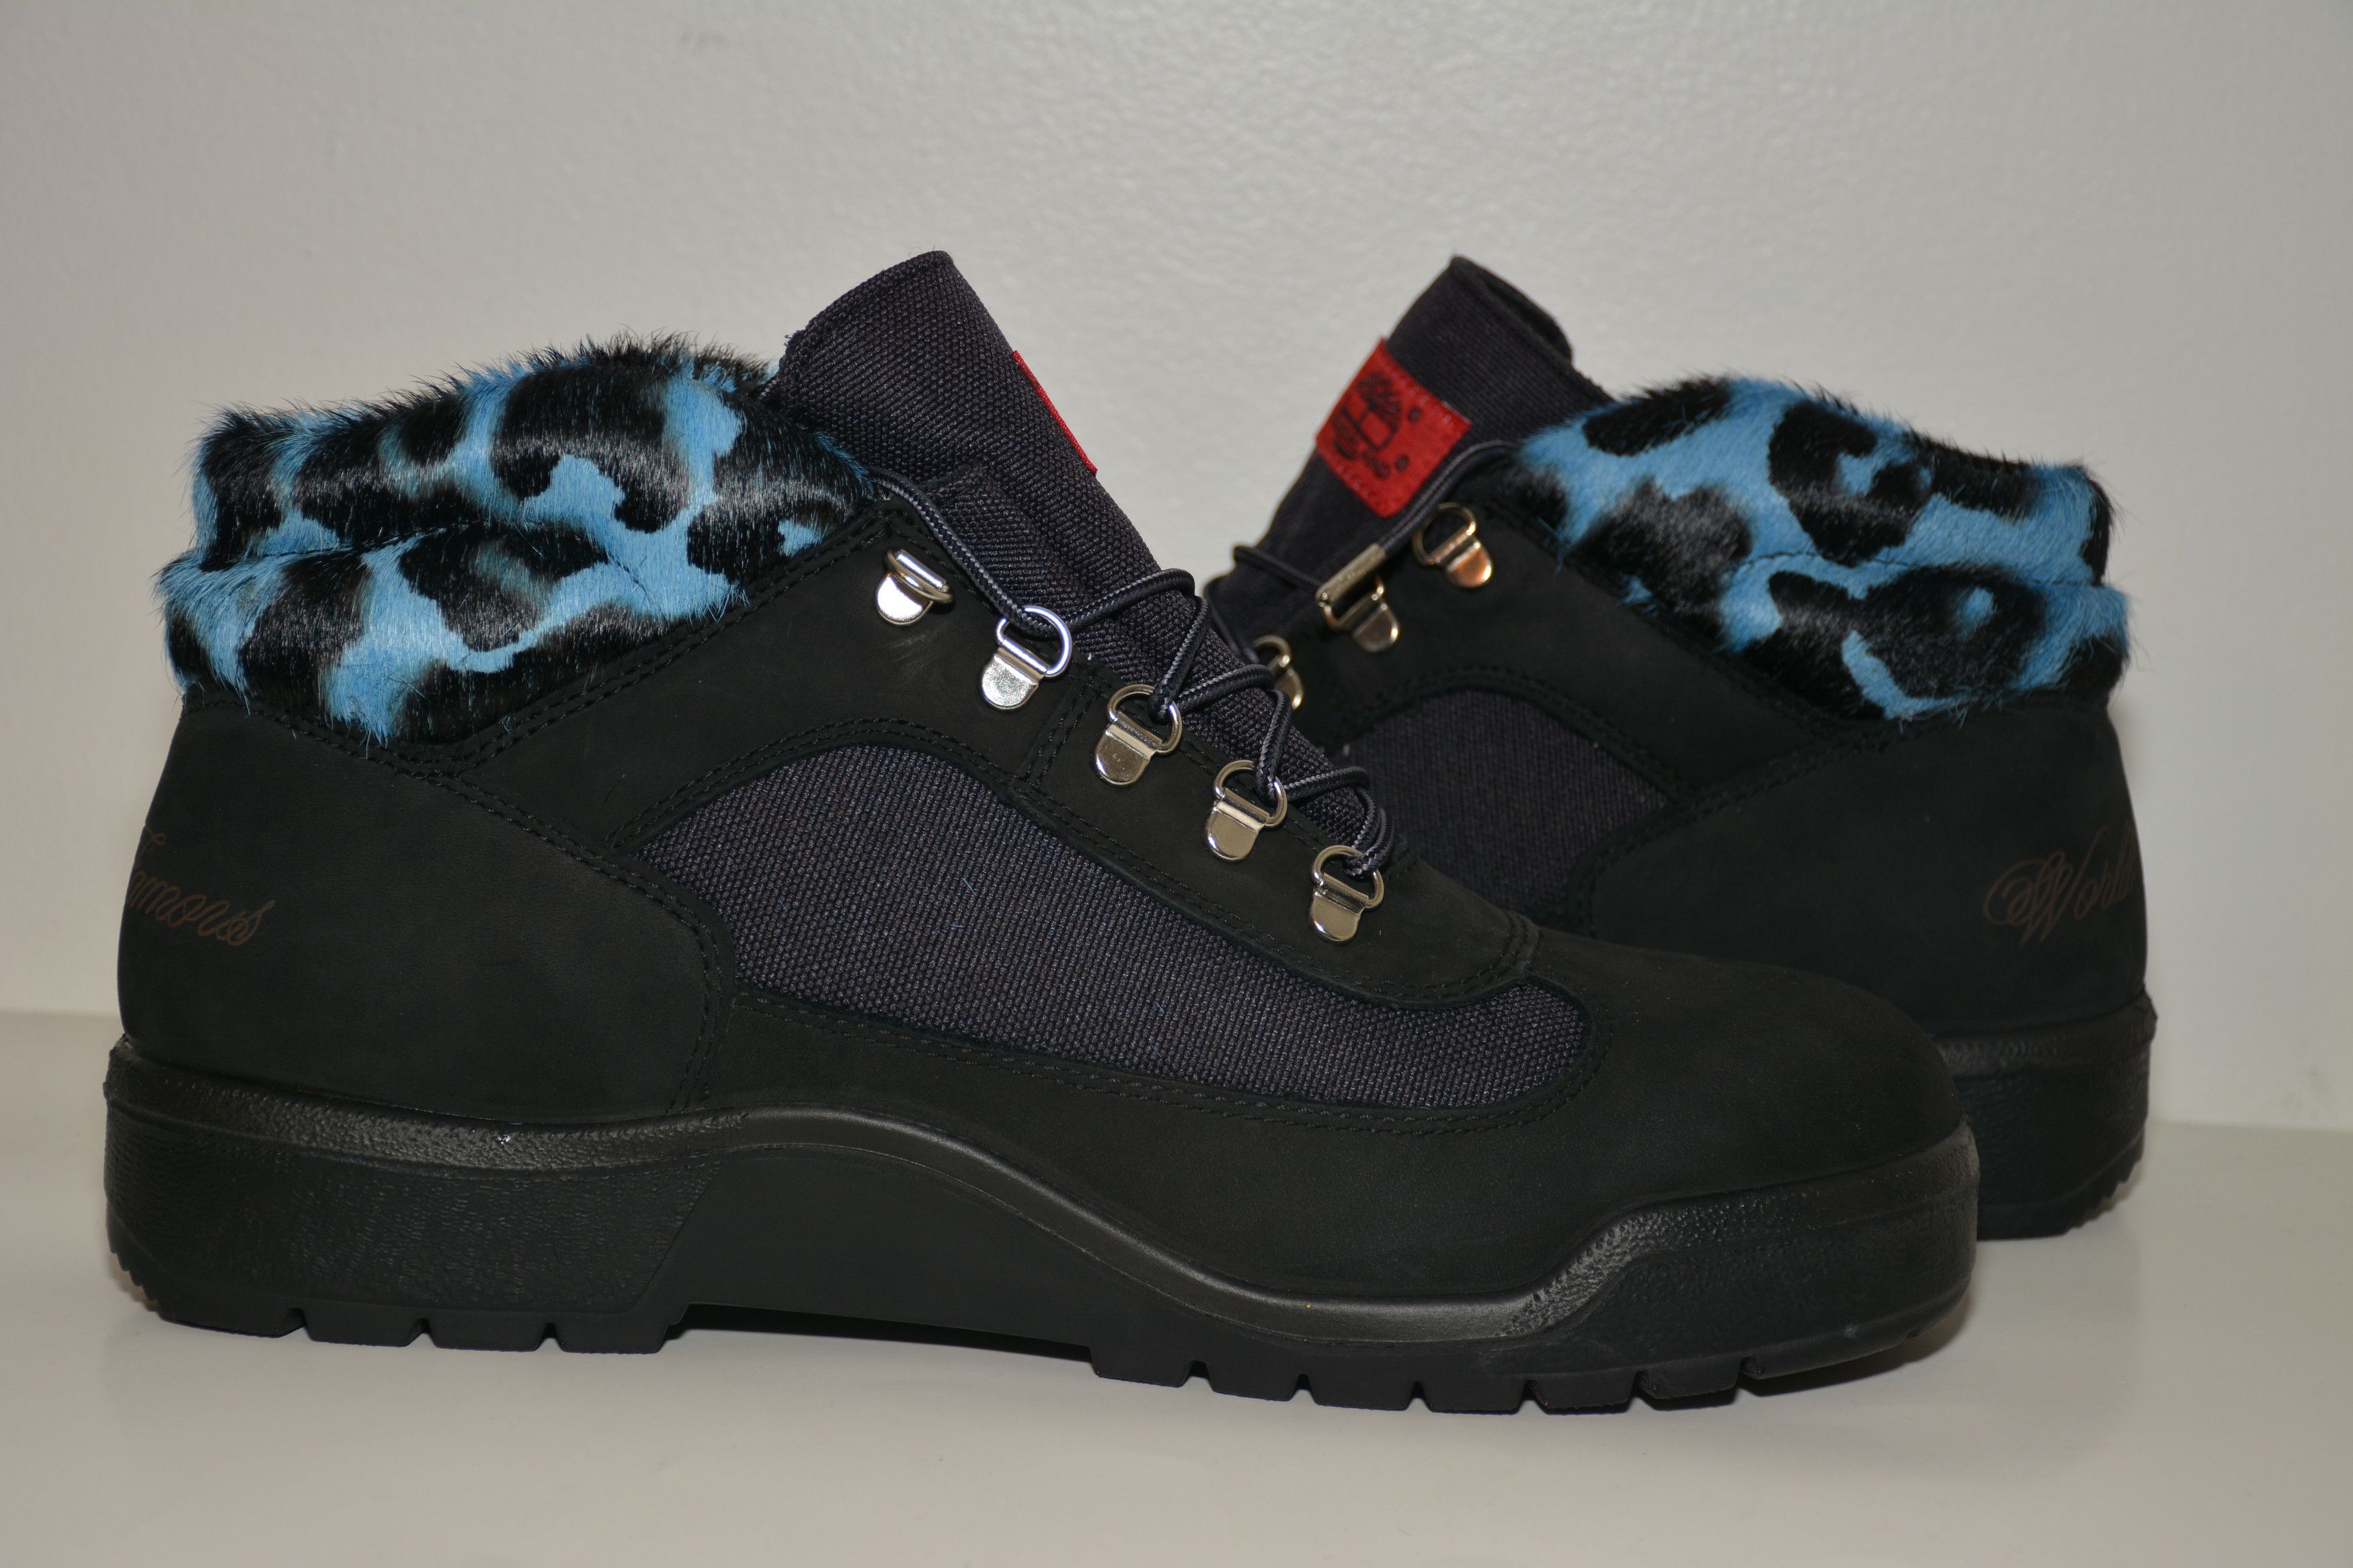 Timberland Supreme X TImberland Field Boot Blue Leopard 2006 Size 12 Rare Size US 12 / EU 45 - 11 Preview